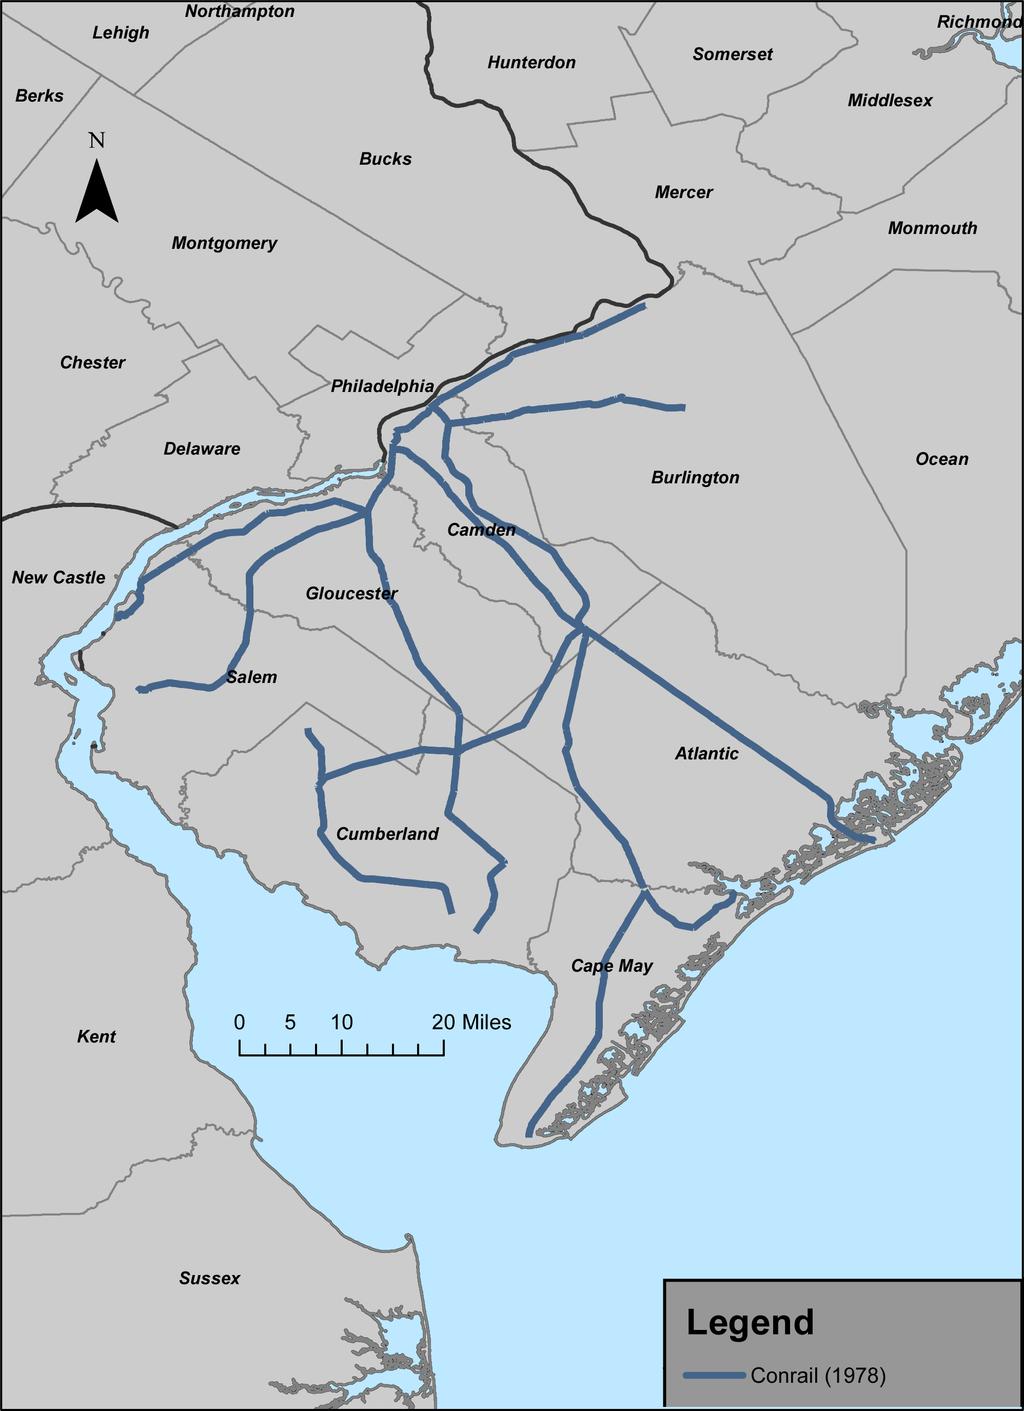 [Chapter 1] Figure 1-9 Southern New Jersey Rail System - The